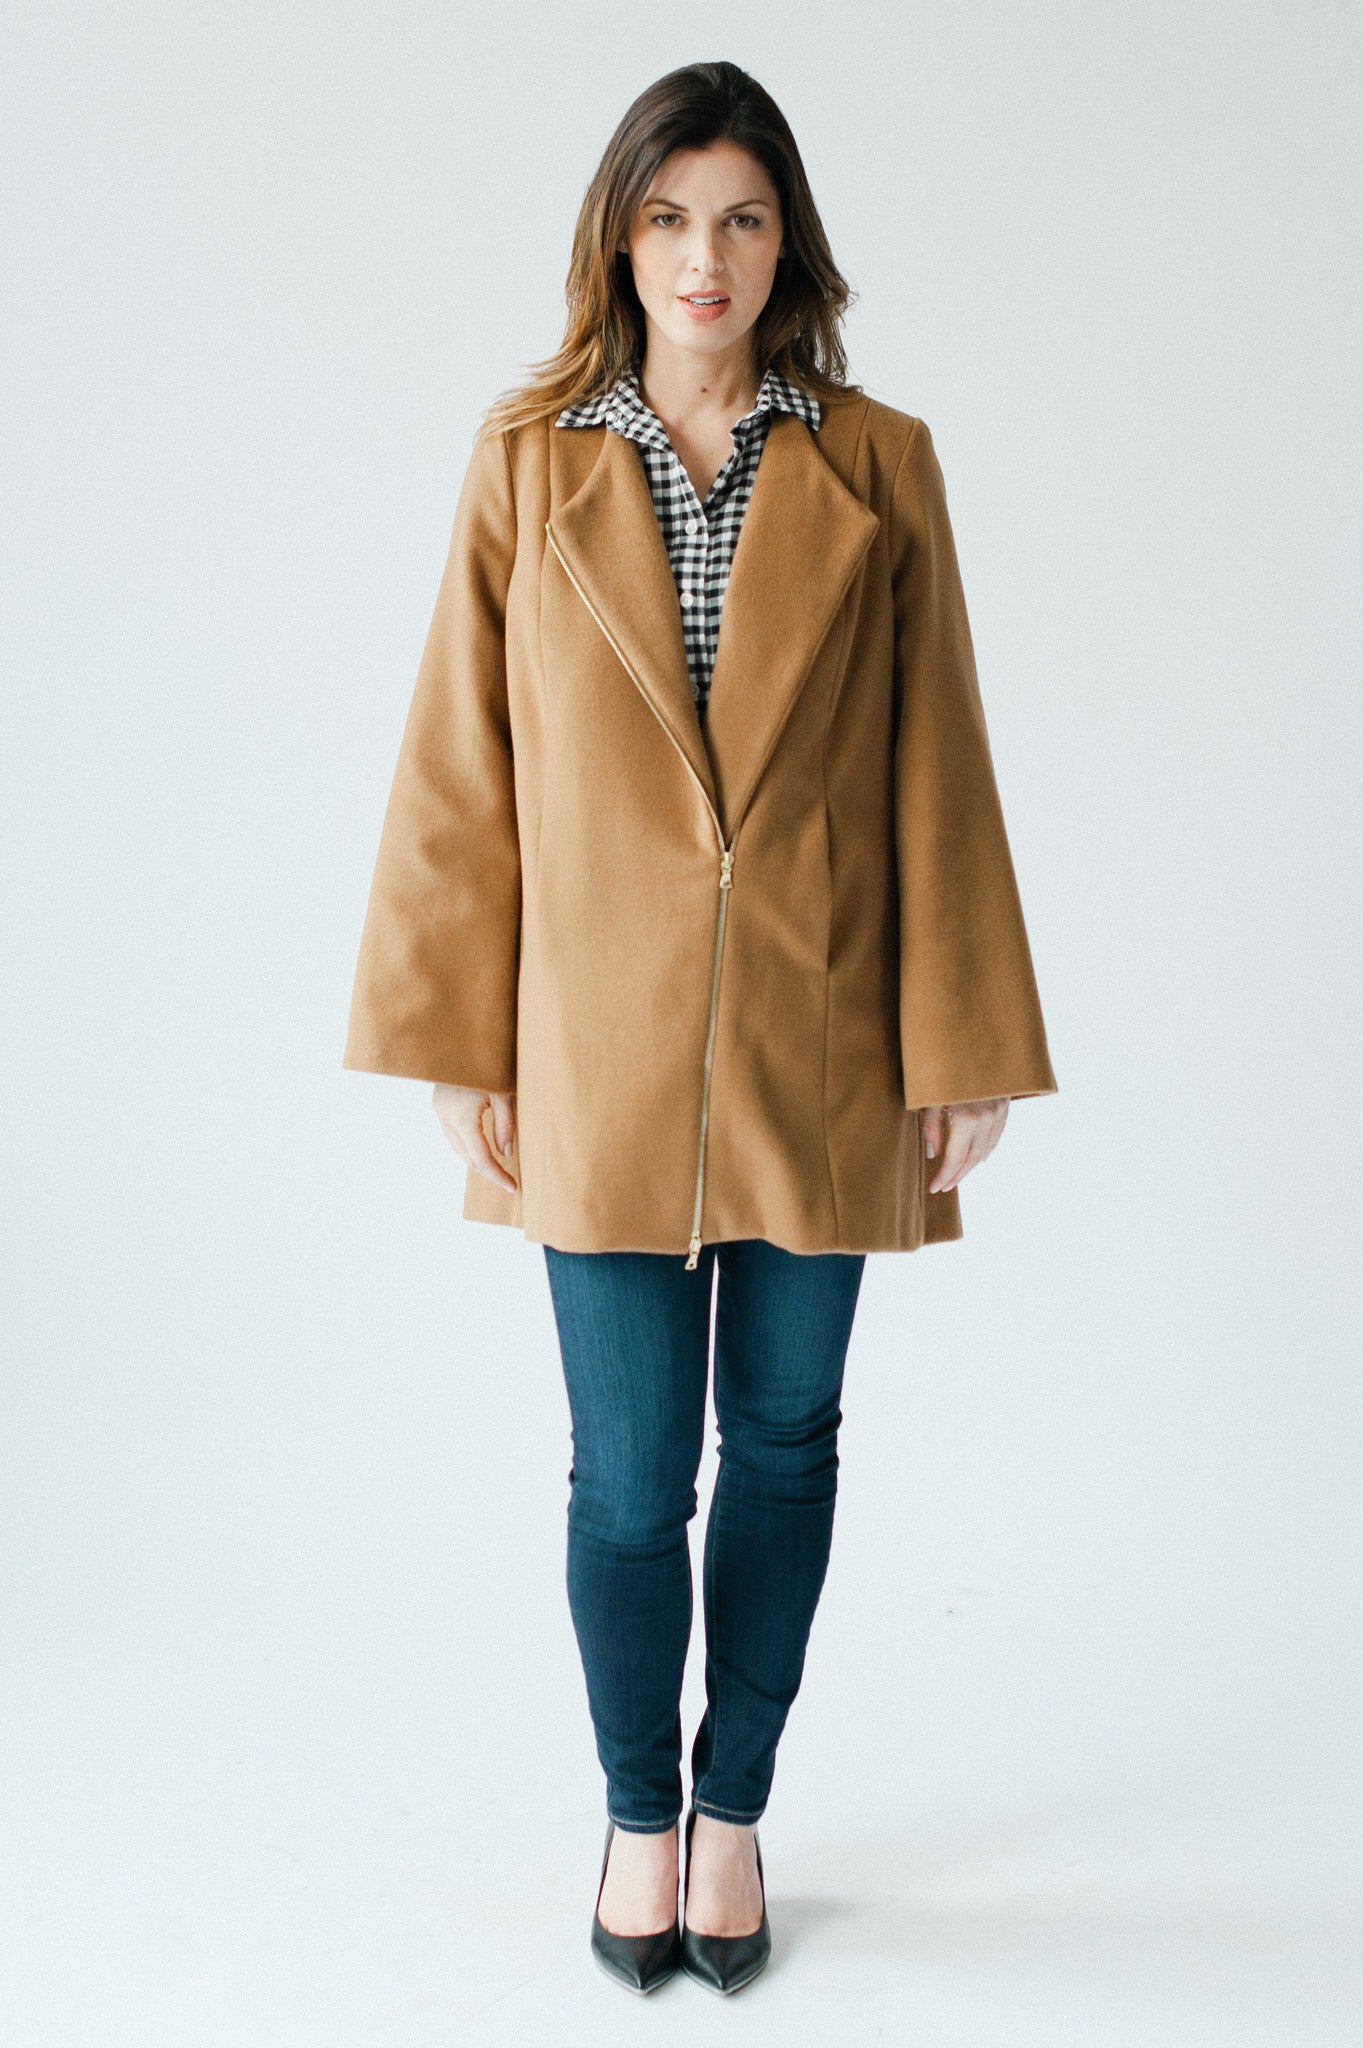 Swingy cashmere Cape Coat in Beautiful Cognac color. Made in USA - Cocoon  by Elizabeth Geisler